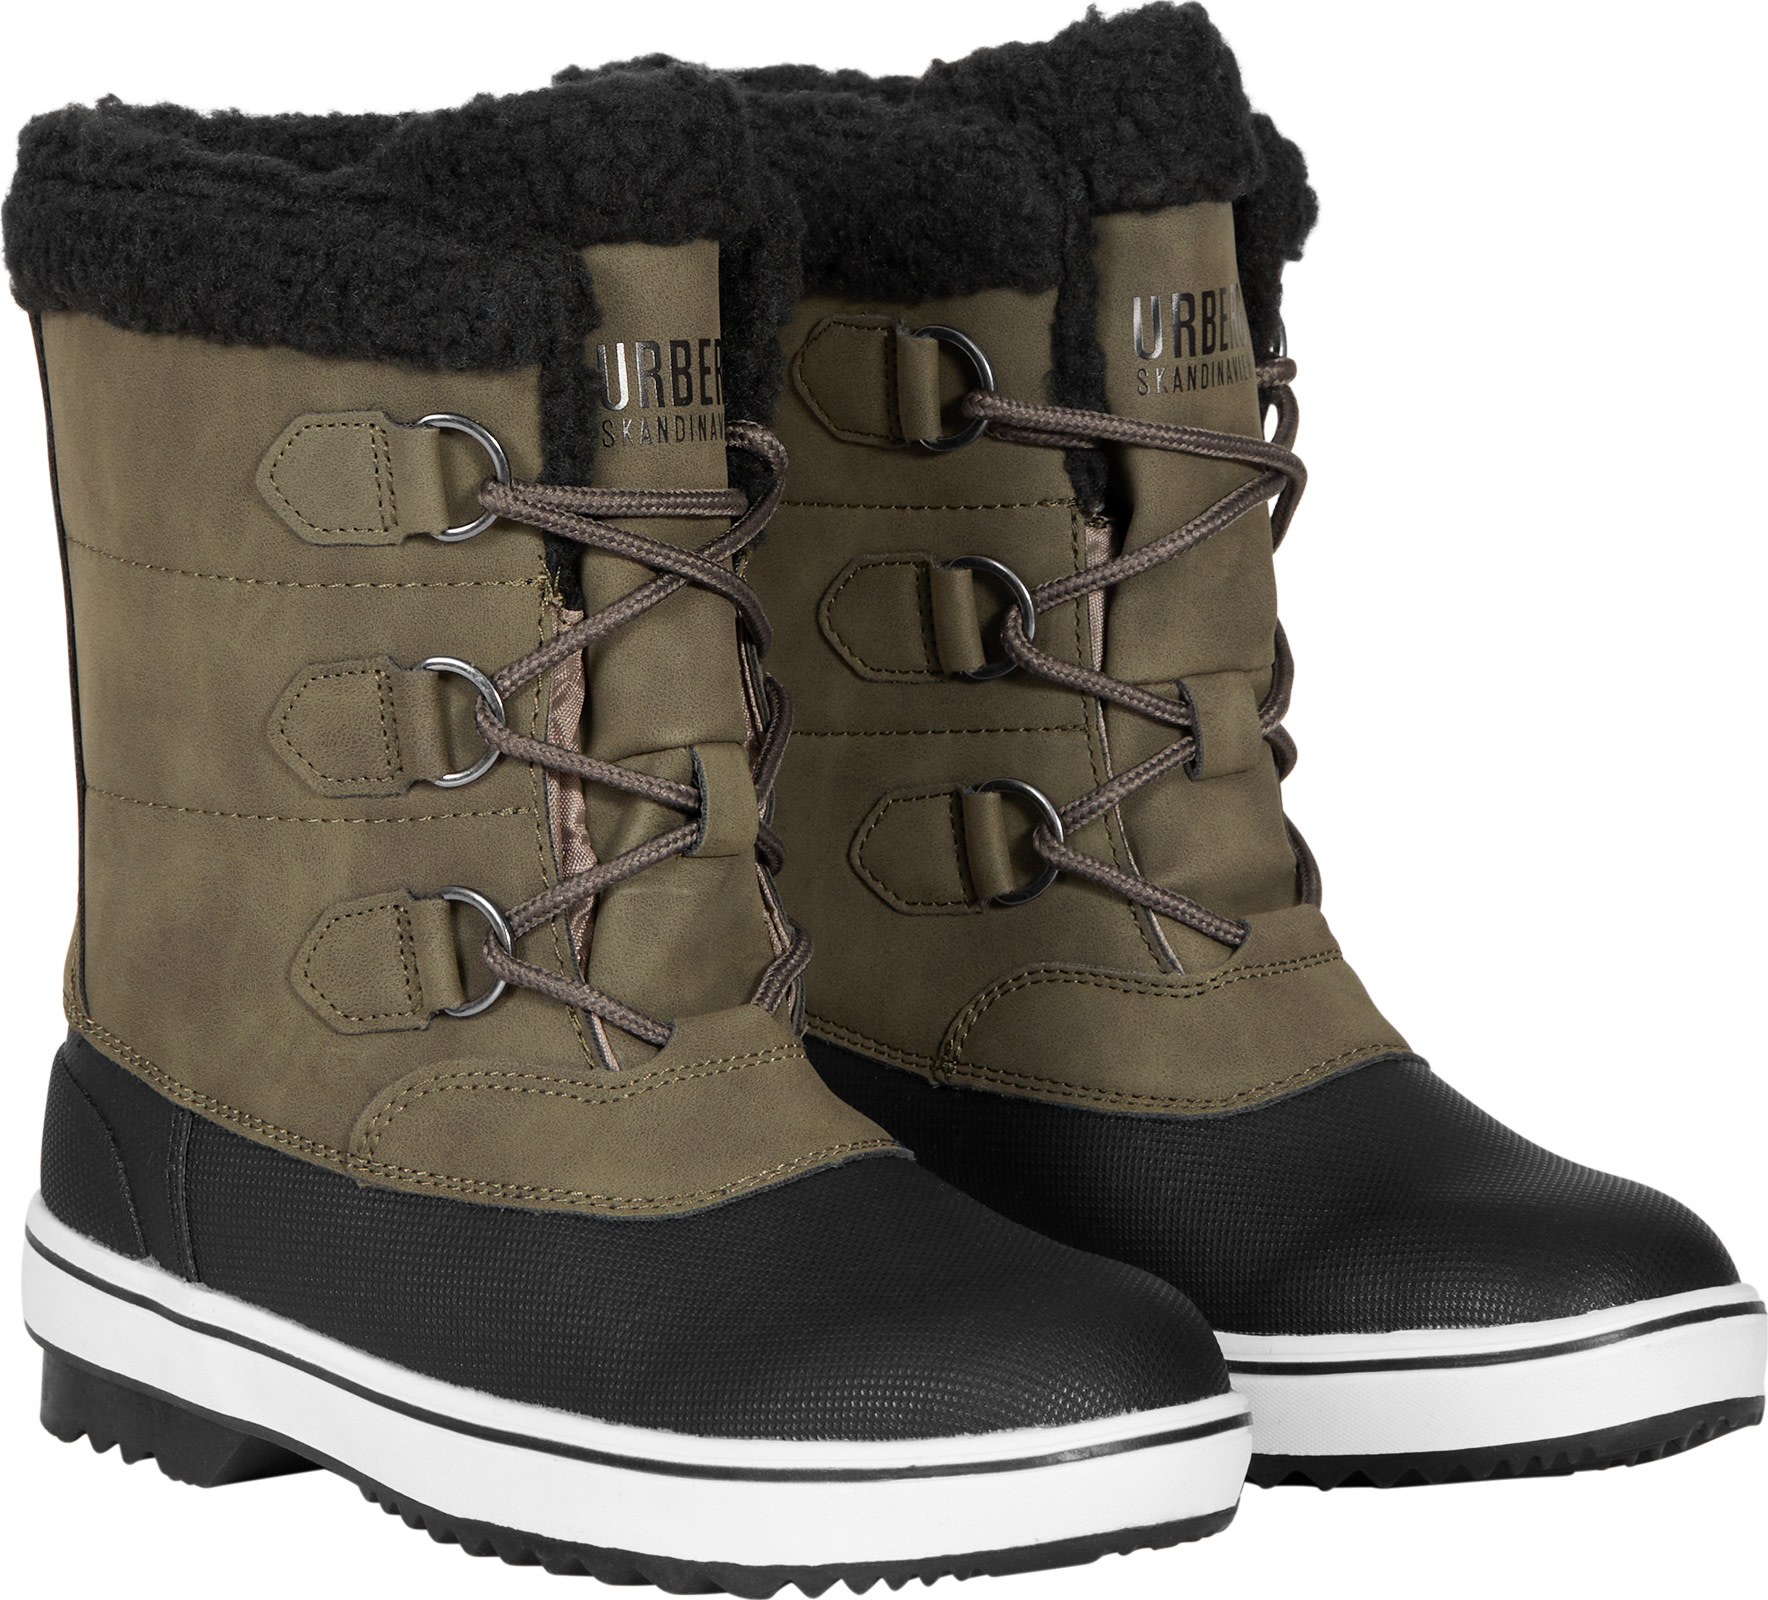 Urberg Kids’ Winter Boots Capers